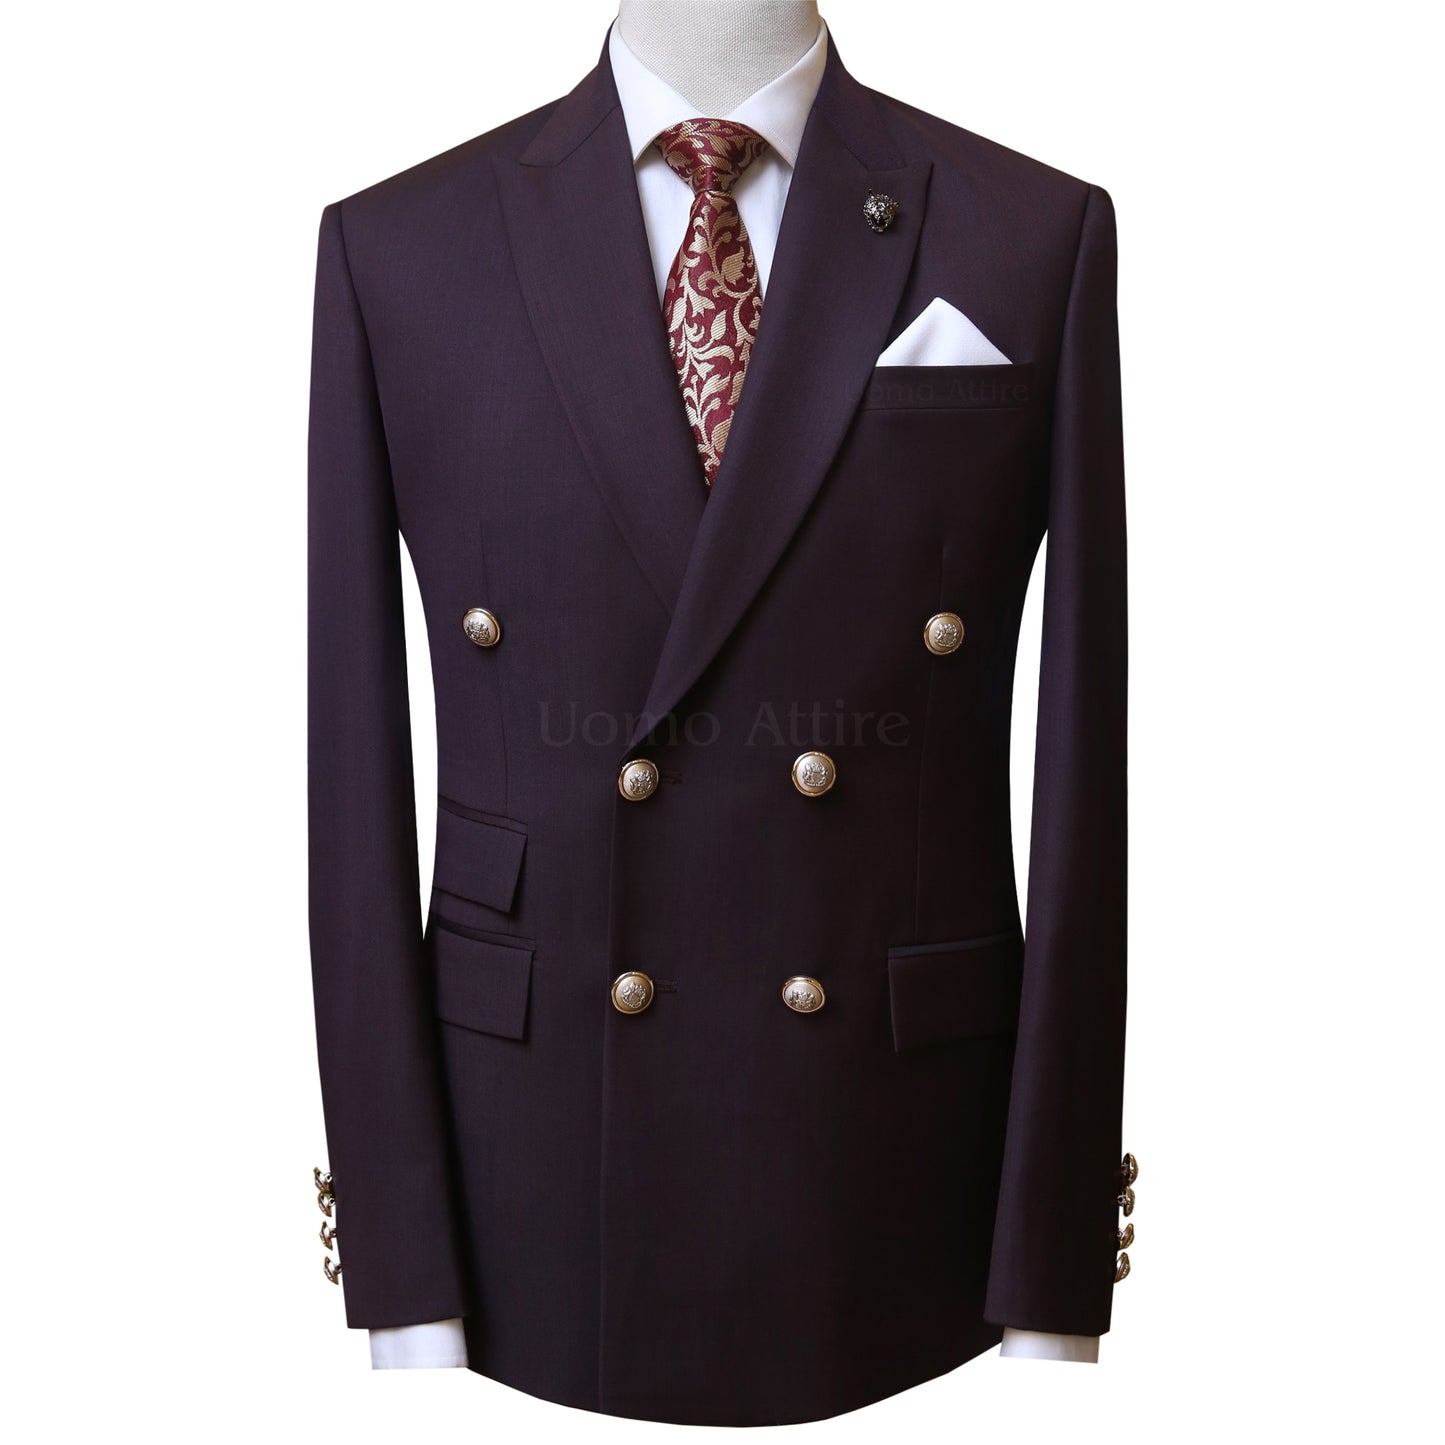 Bespoke double breasted 2 piece suit, double breasted suit with golden buttons, double breasted 2 piece suit